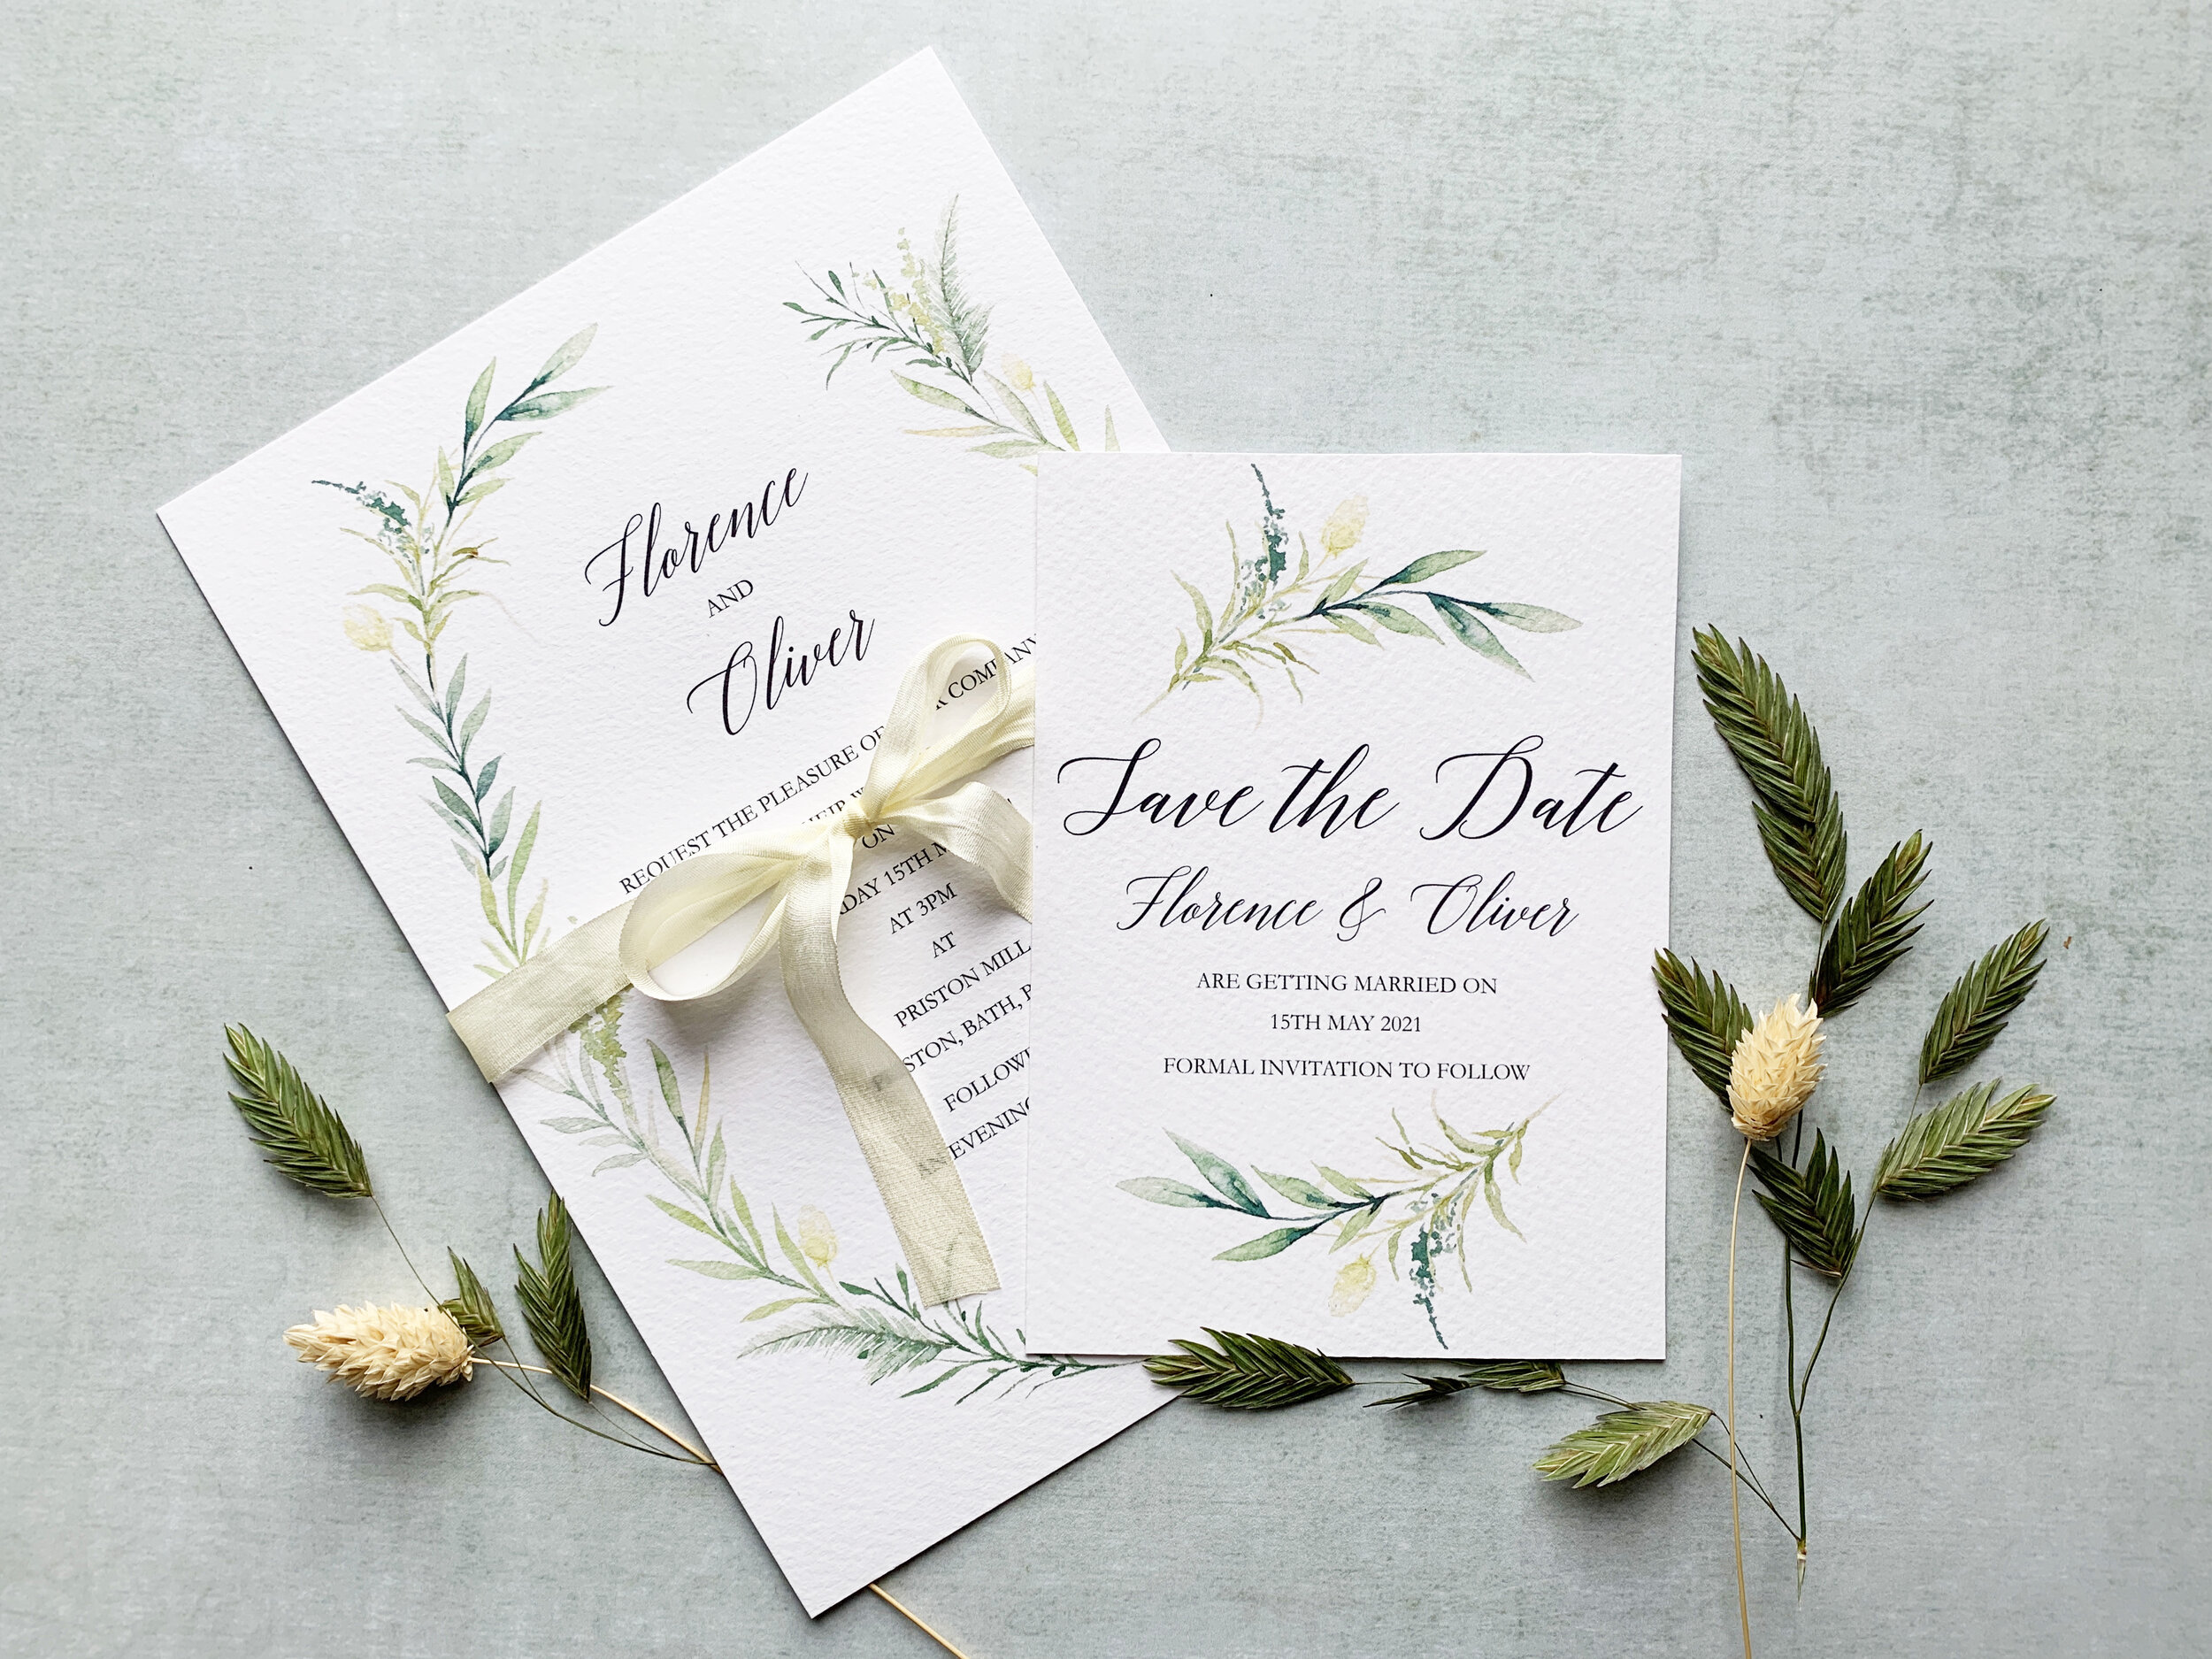 Meadow Invite and save the date.jpg